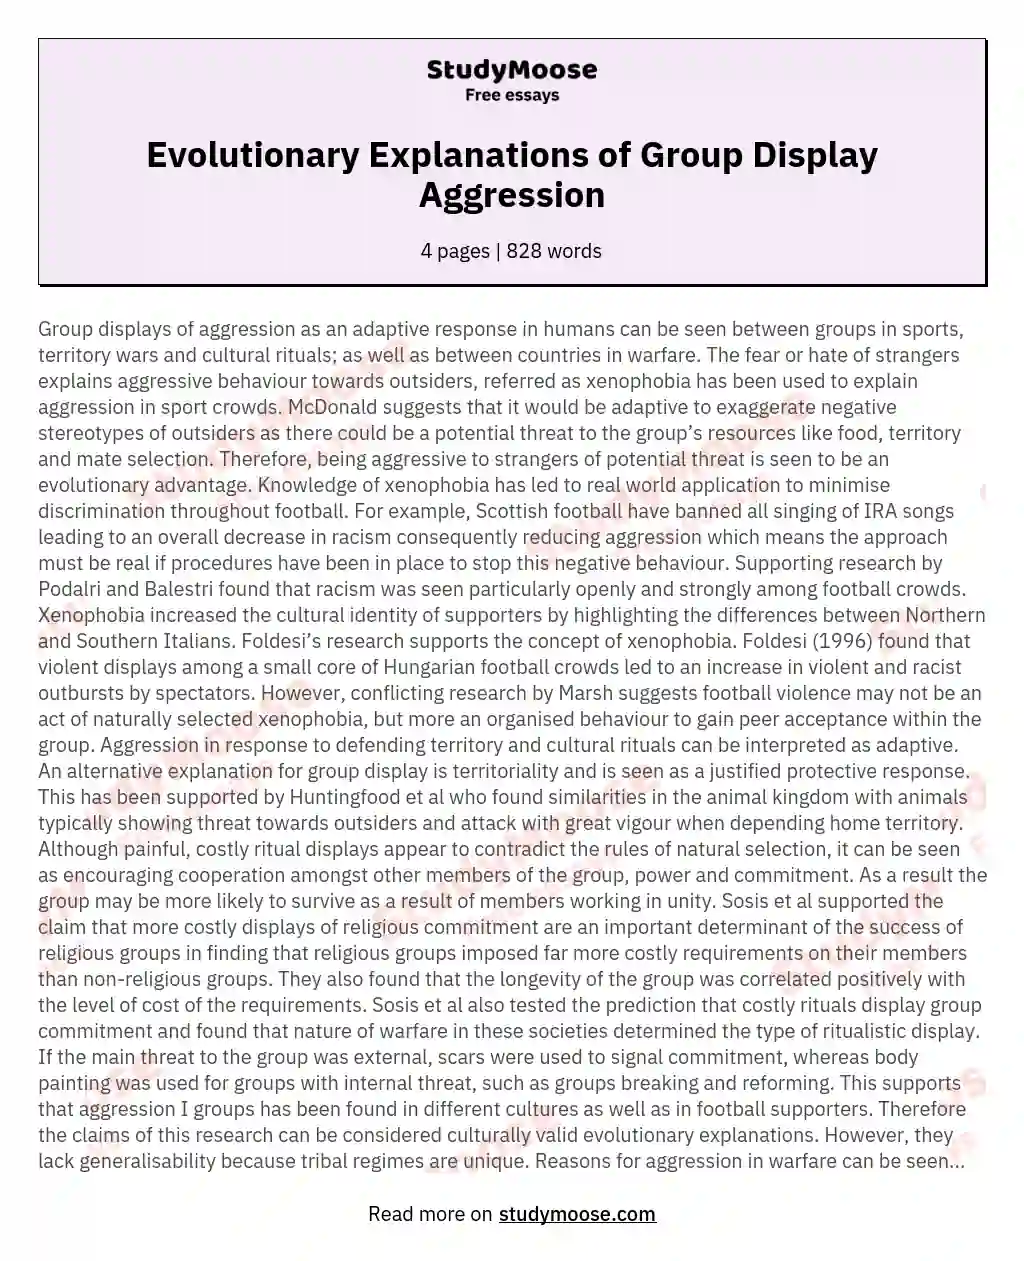 Evolutionary Explanations of Group Display Aggression